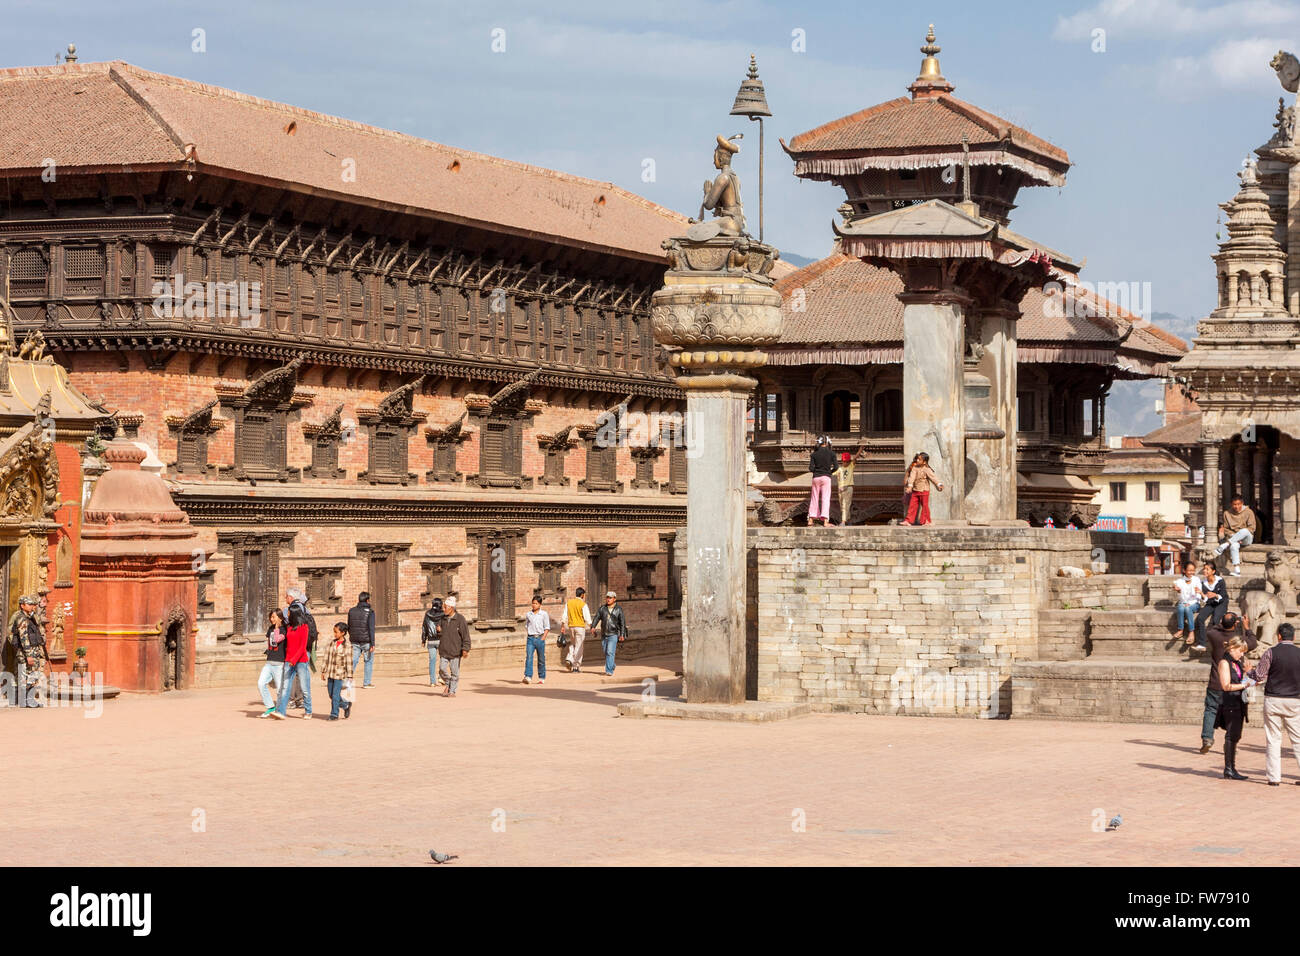 Bhaktapur, Nepal.  Durbar Square, Palace of 55 Windows on Left,  King Bhupatindra's Column in Middle. Stock Photo